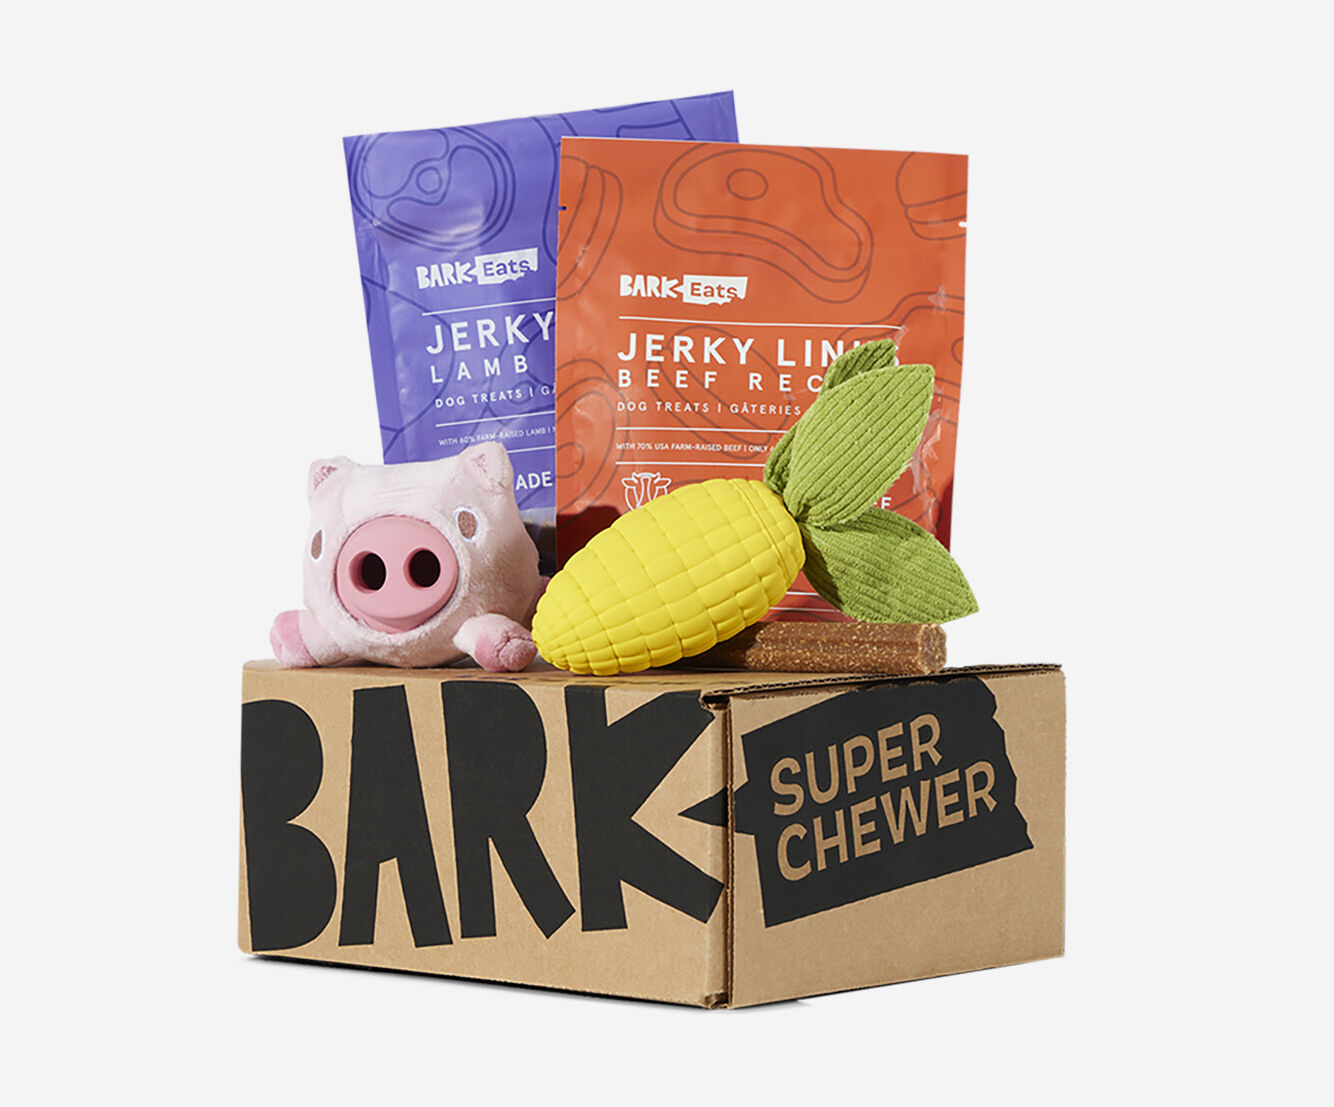 Super Chewer box full of tough toys and meaty treats